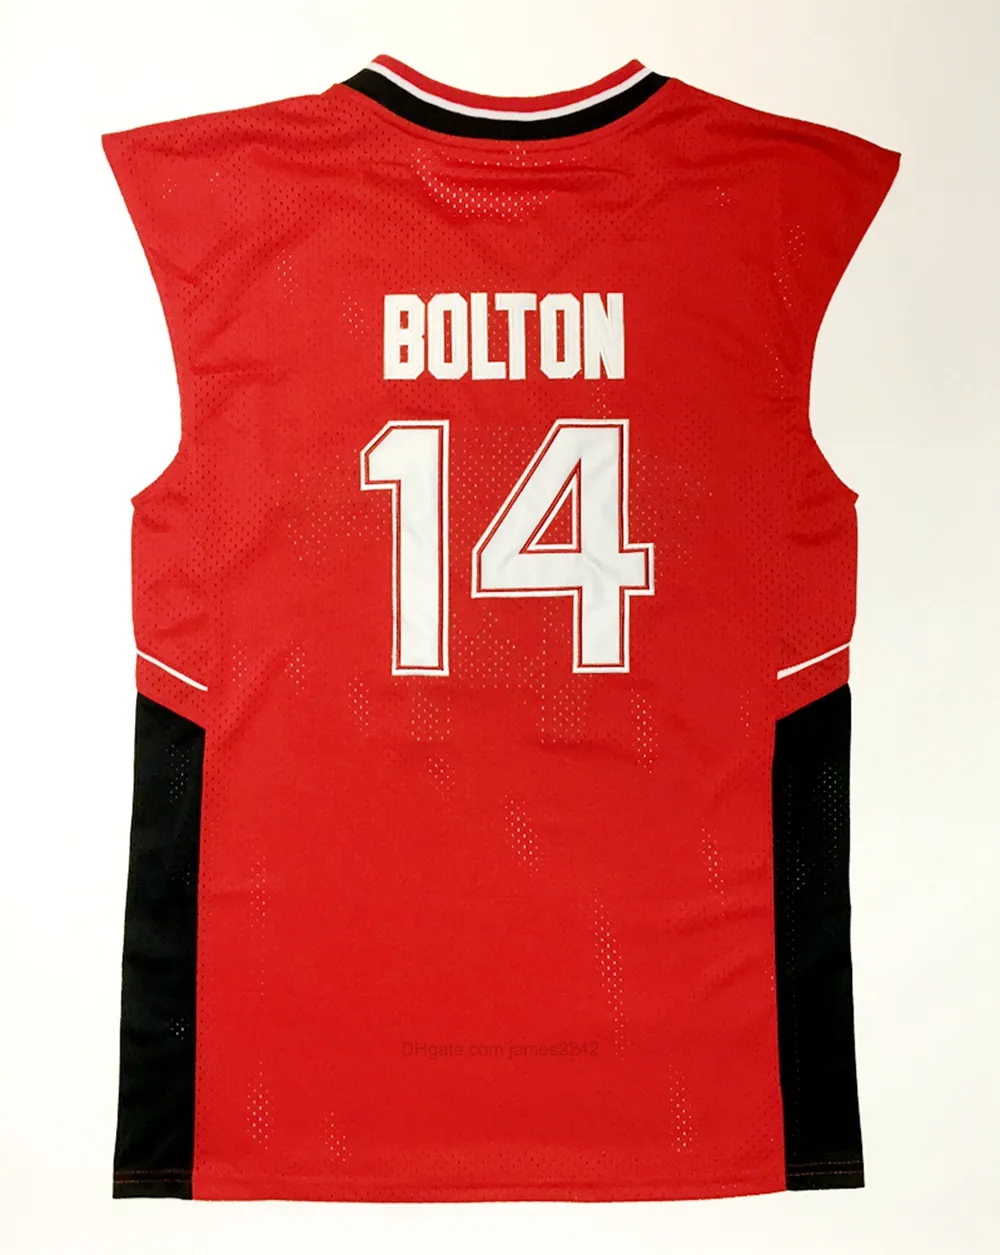 Ship From US #Wildcats 14 Troy Bolton Basketball Jersey High School College Jerseys Mens Vintage stitched Red Size S-XXXL